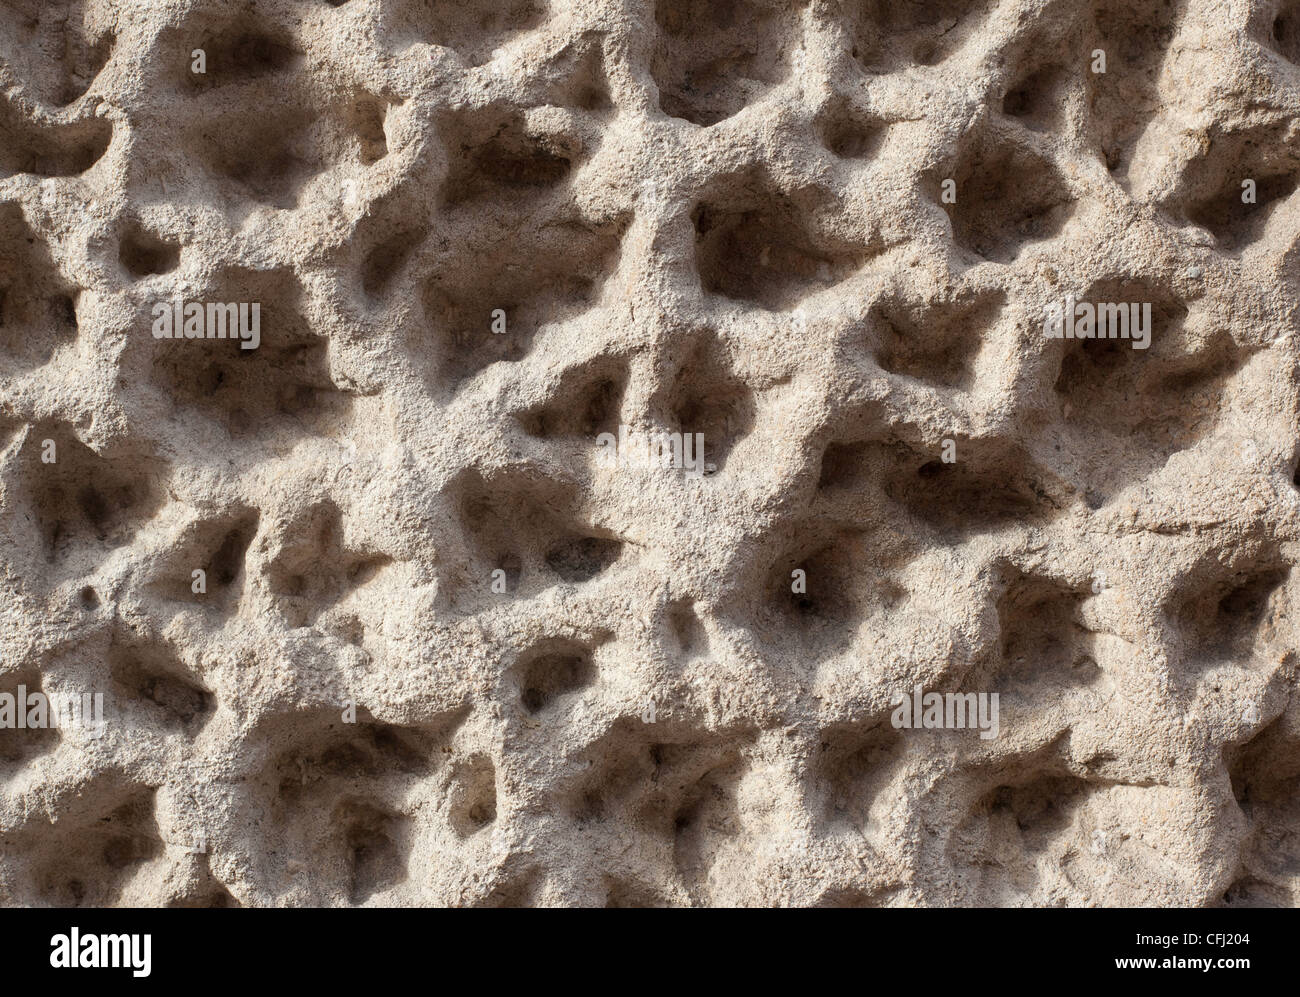 Large Stone With Holes Close Up Stock Photo, Picture and Royalty